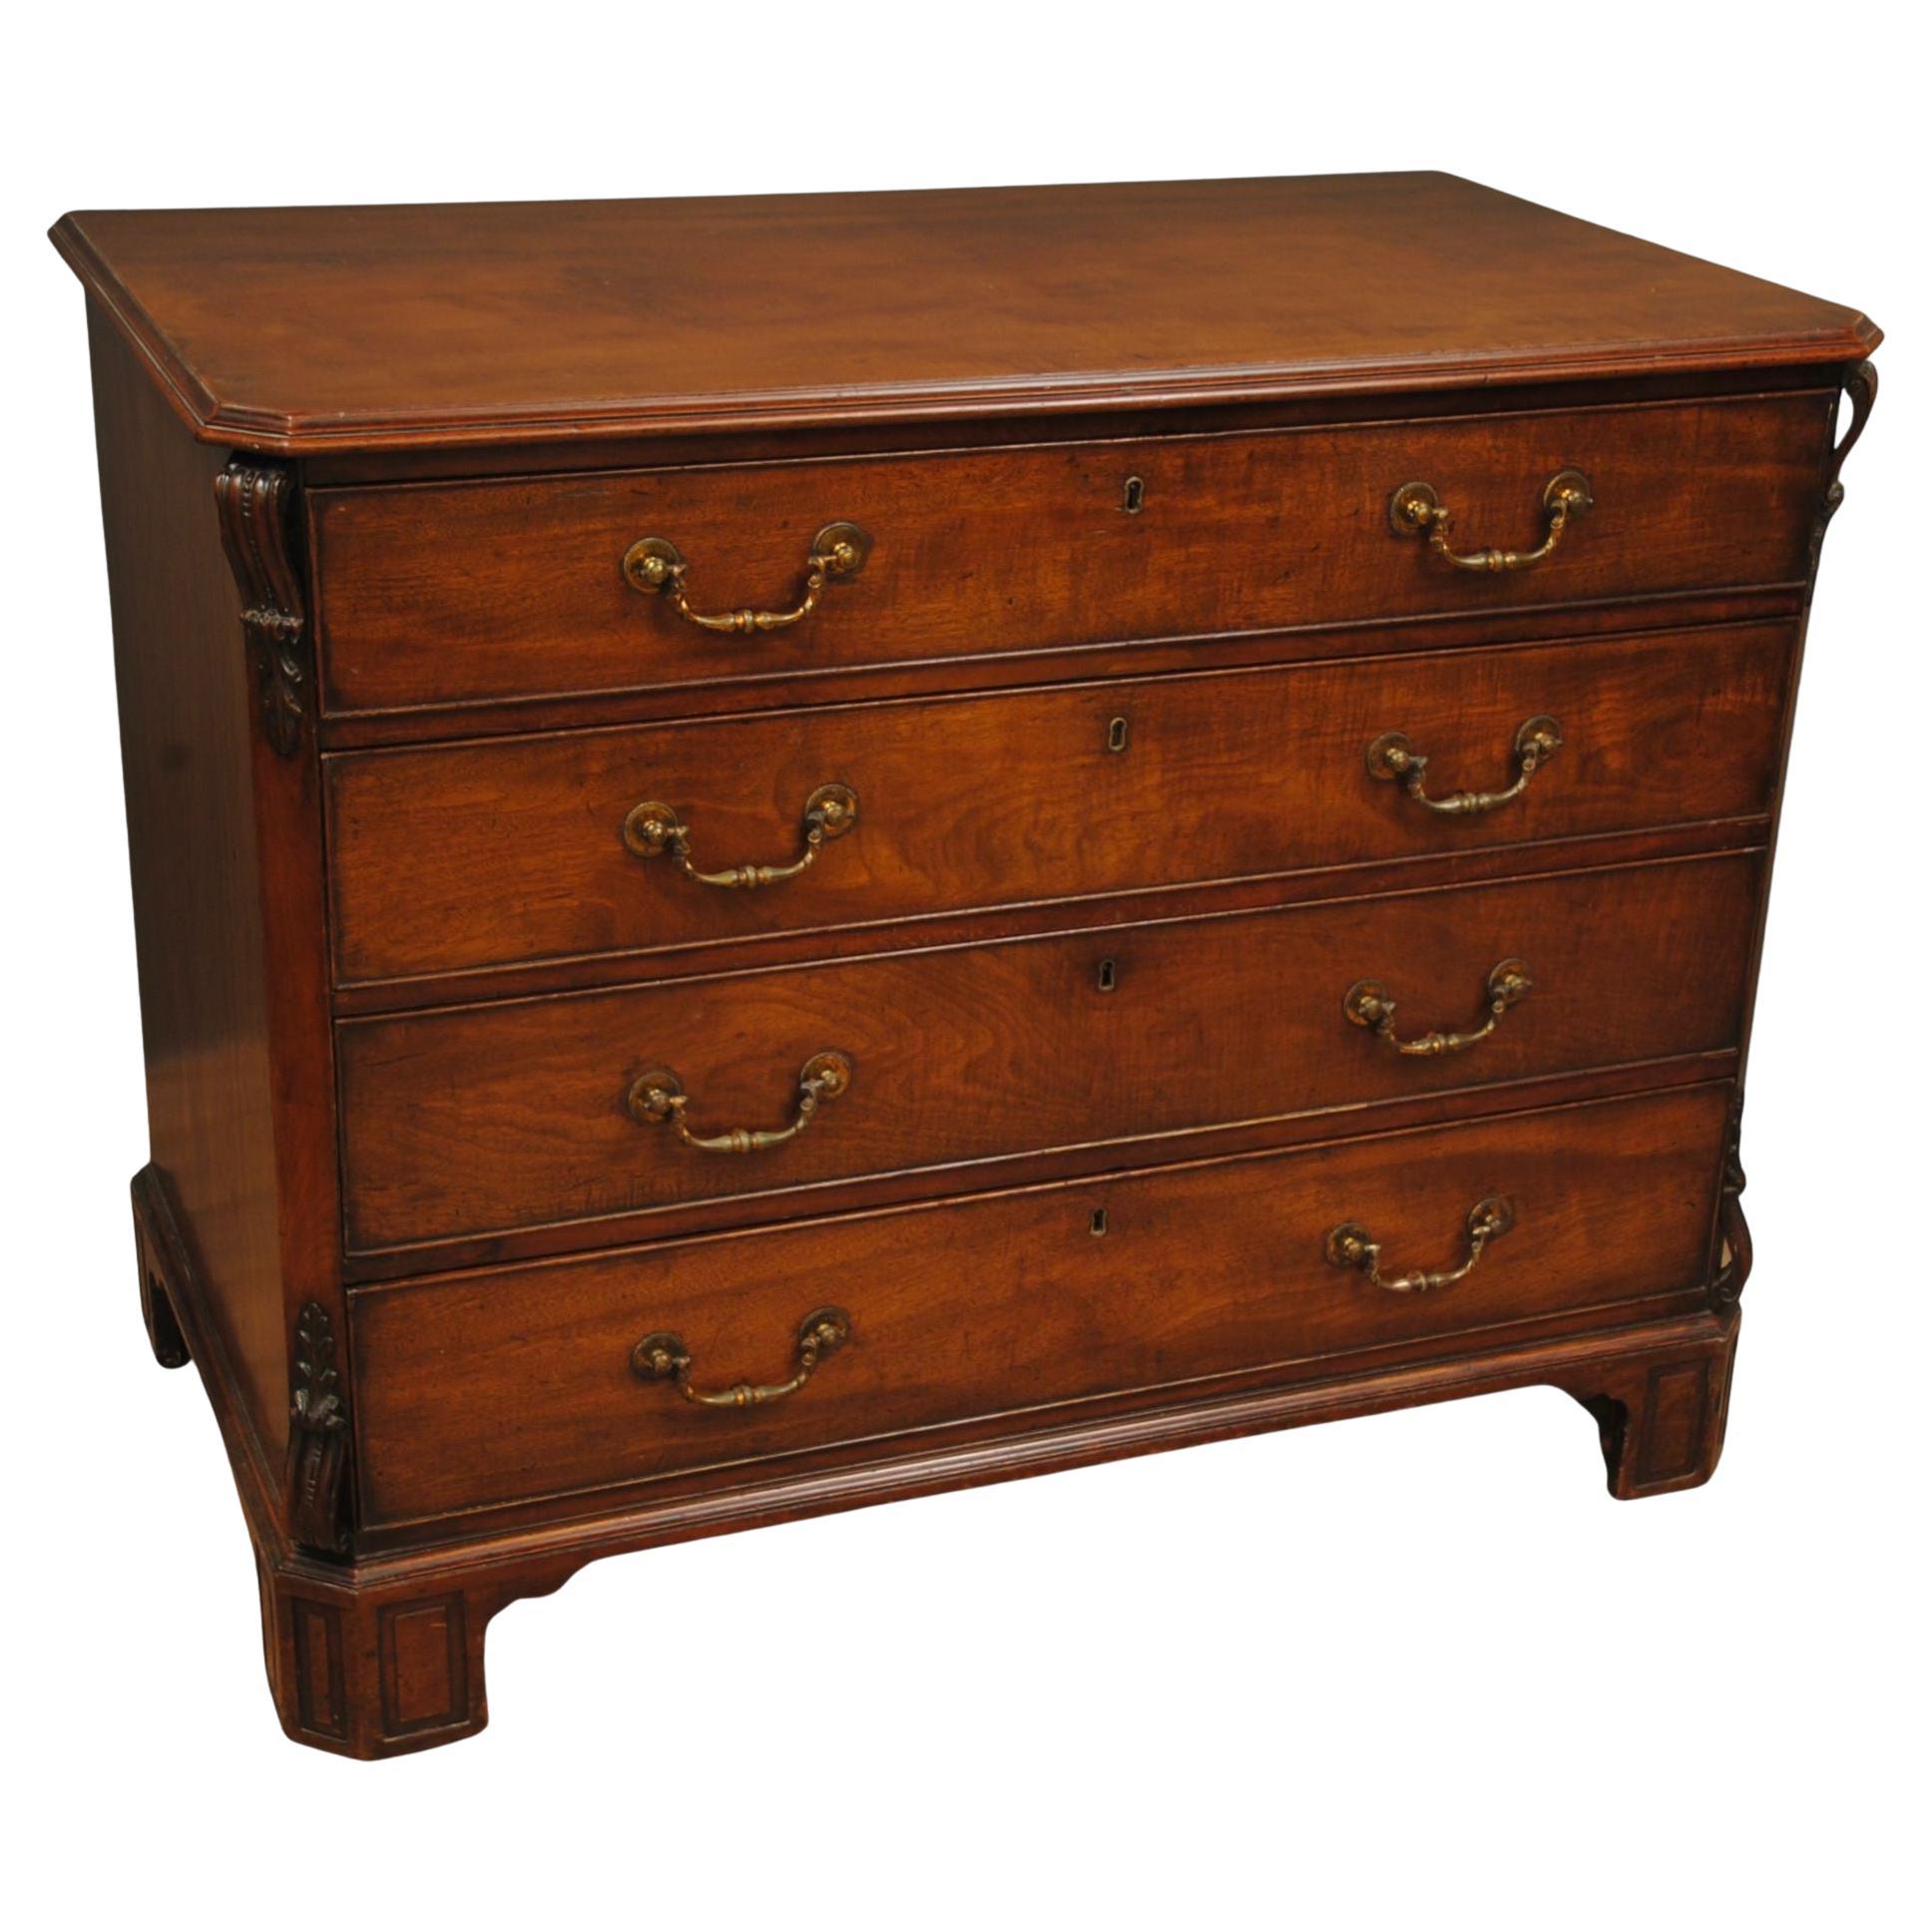 Chippendale Period Mahogany Gentleman's Dressing Chest